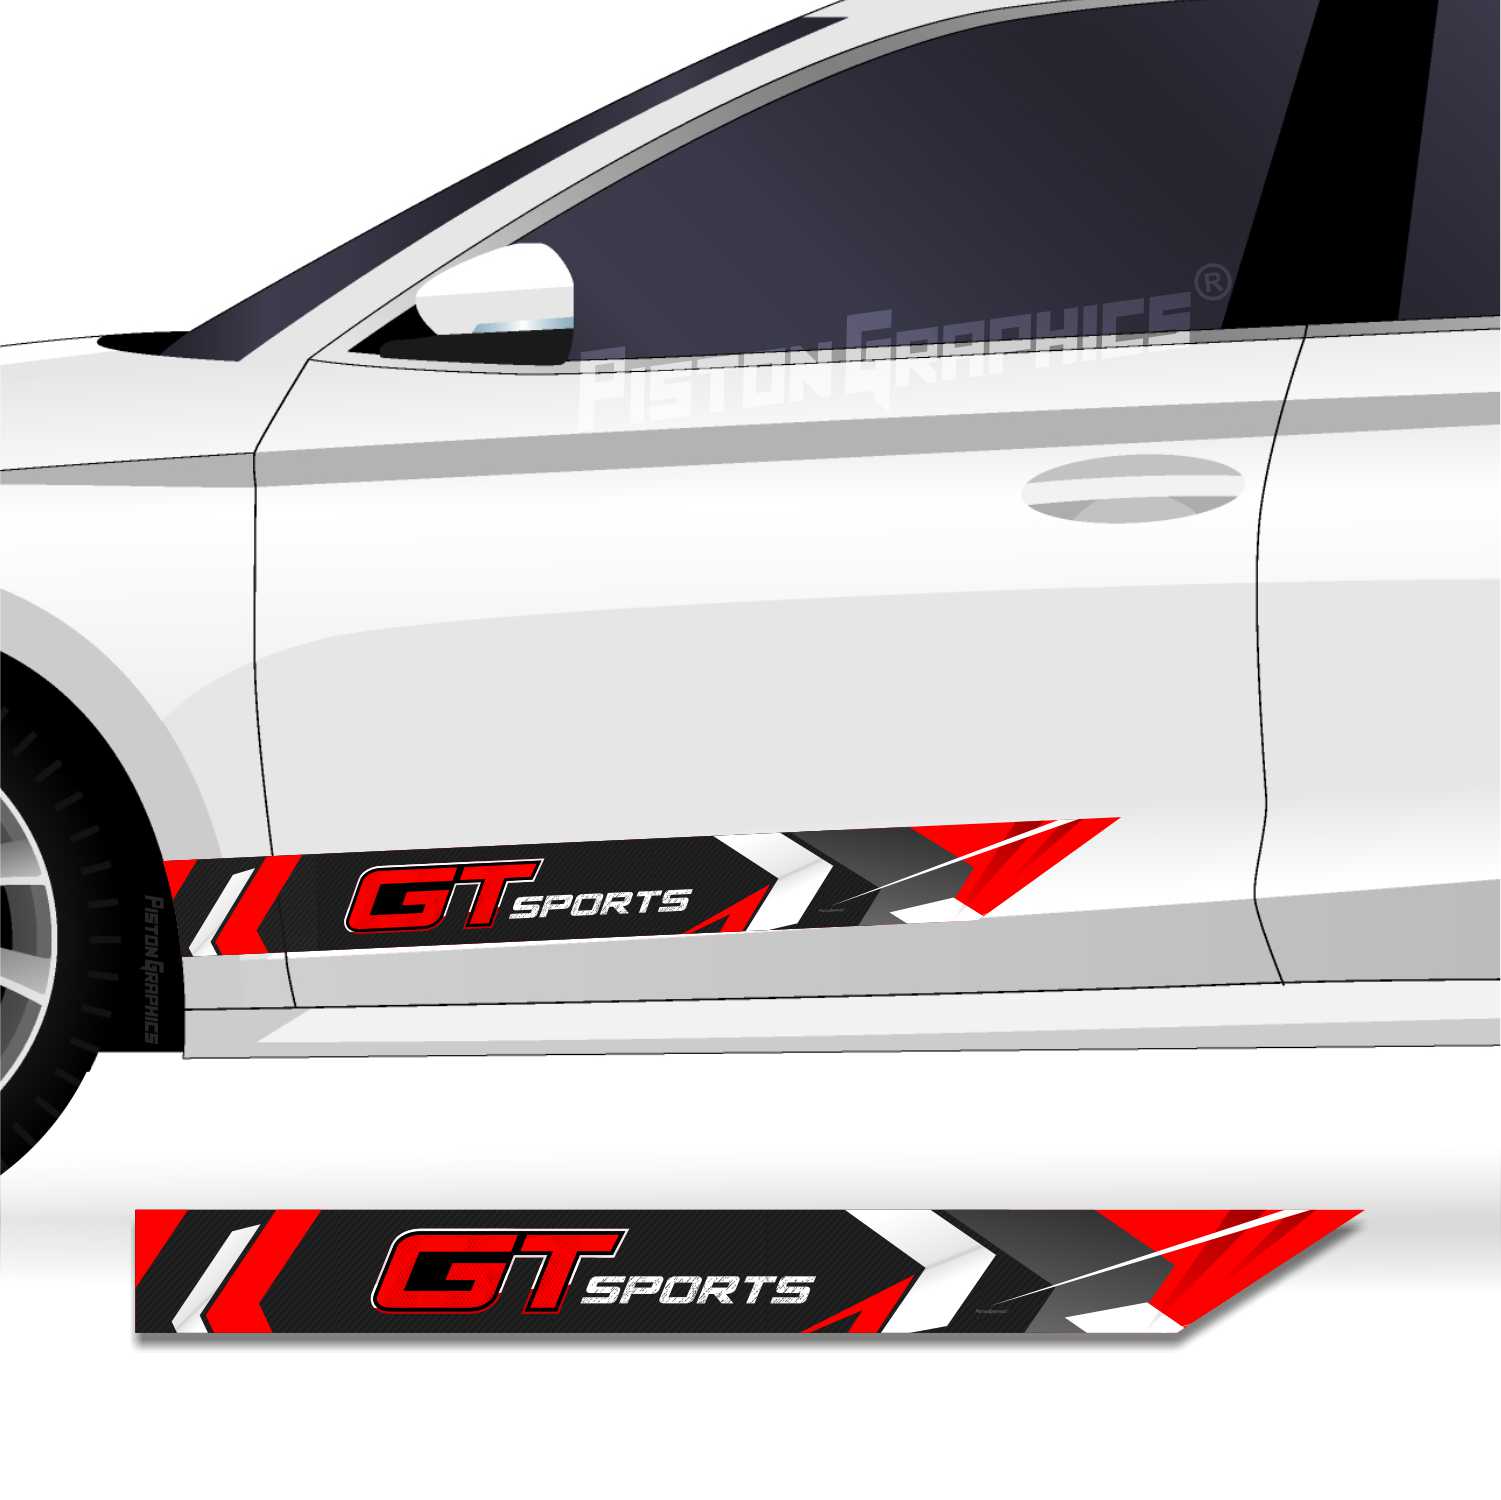 Piston Graphic Stickers for Cars - GT racing Sticker graphics